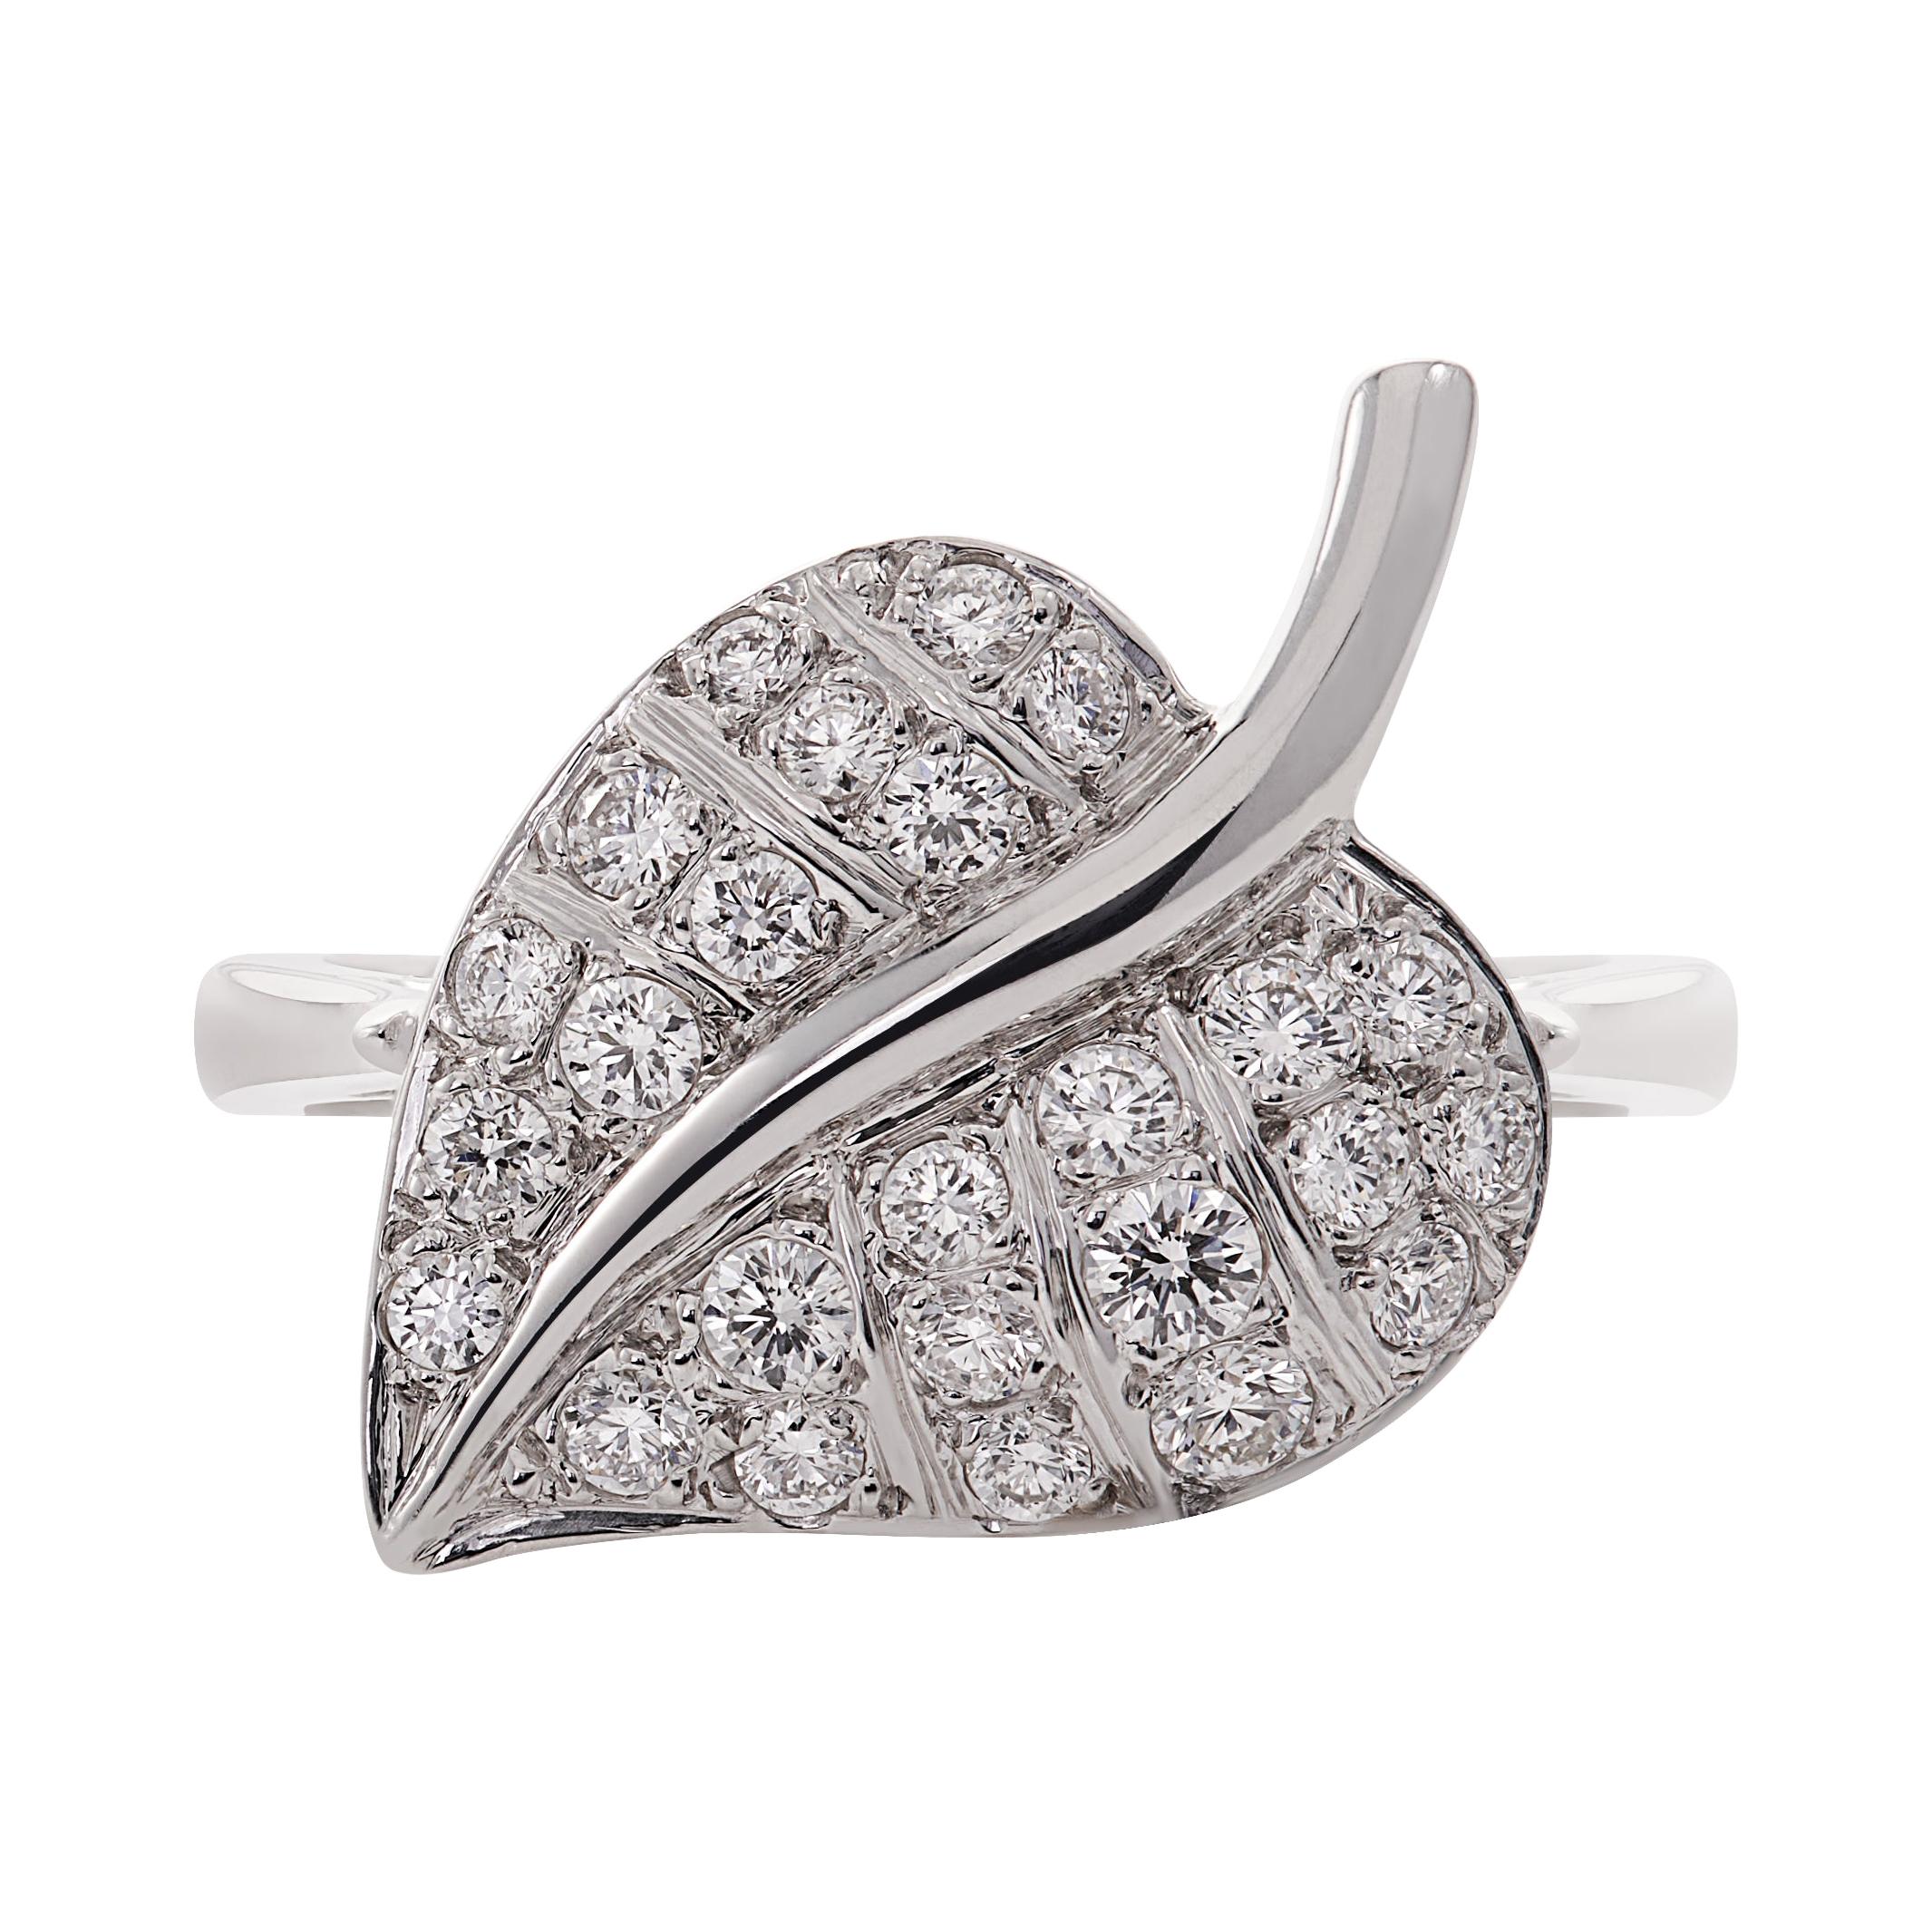 E Wolfe and Company 18ct White Gold Diamond-Set Leaf Ring For Sale